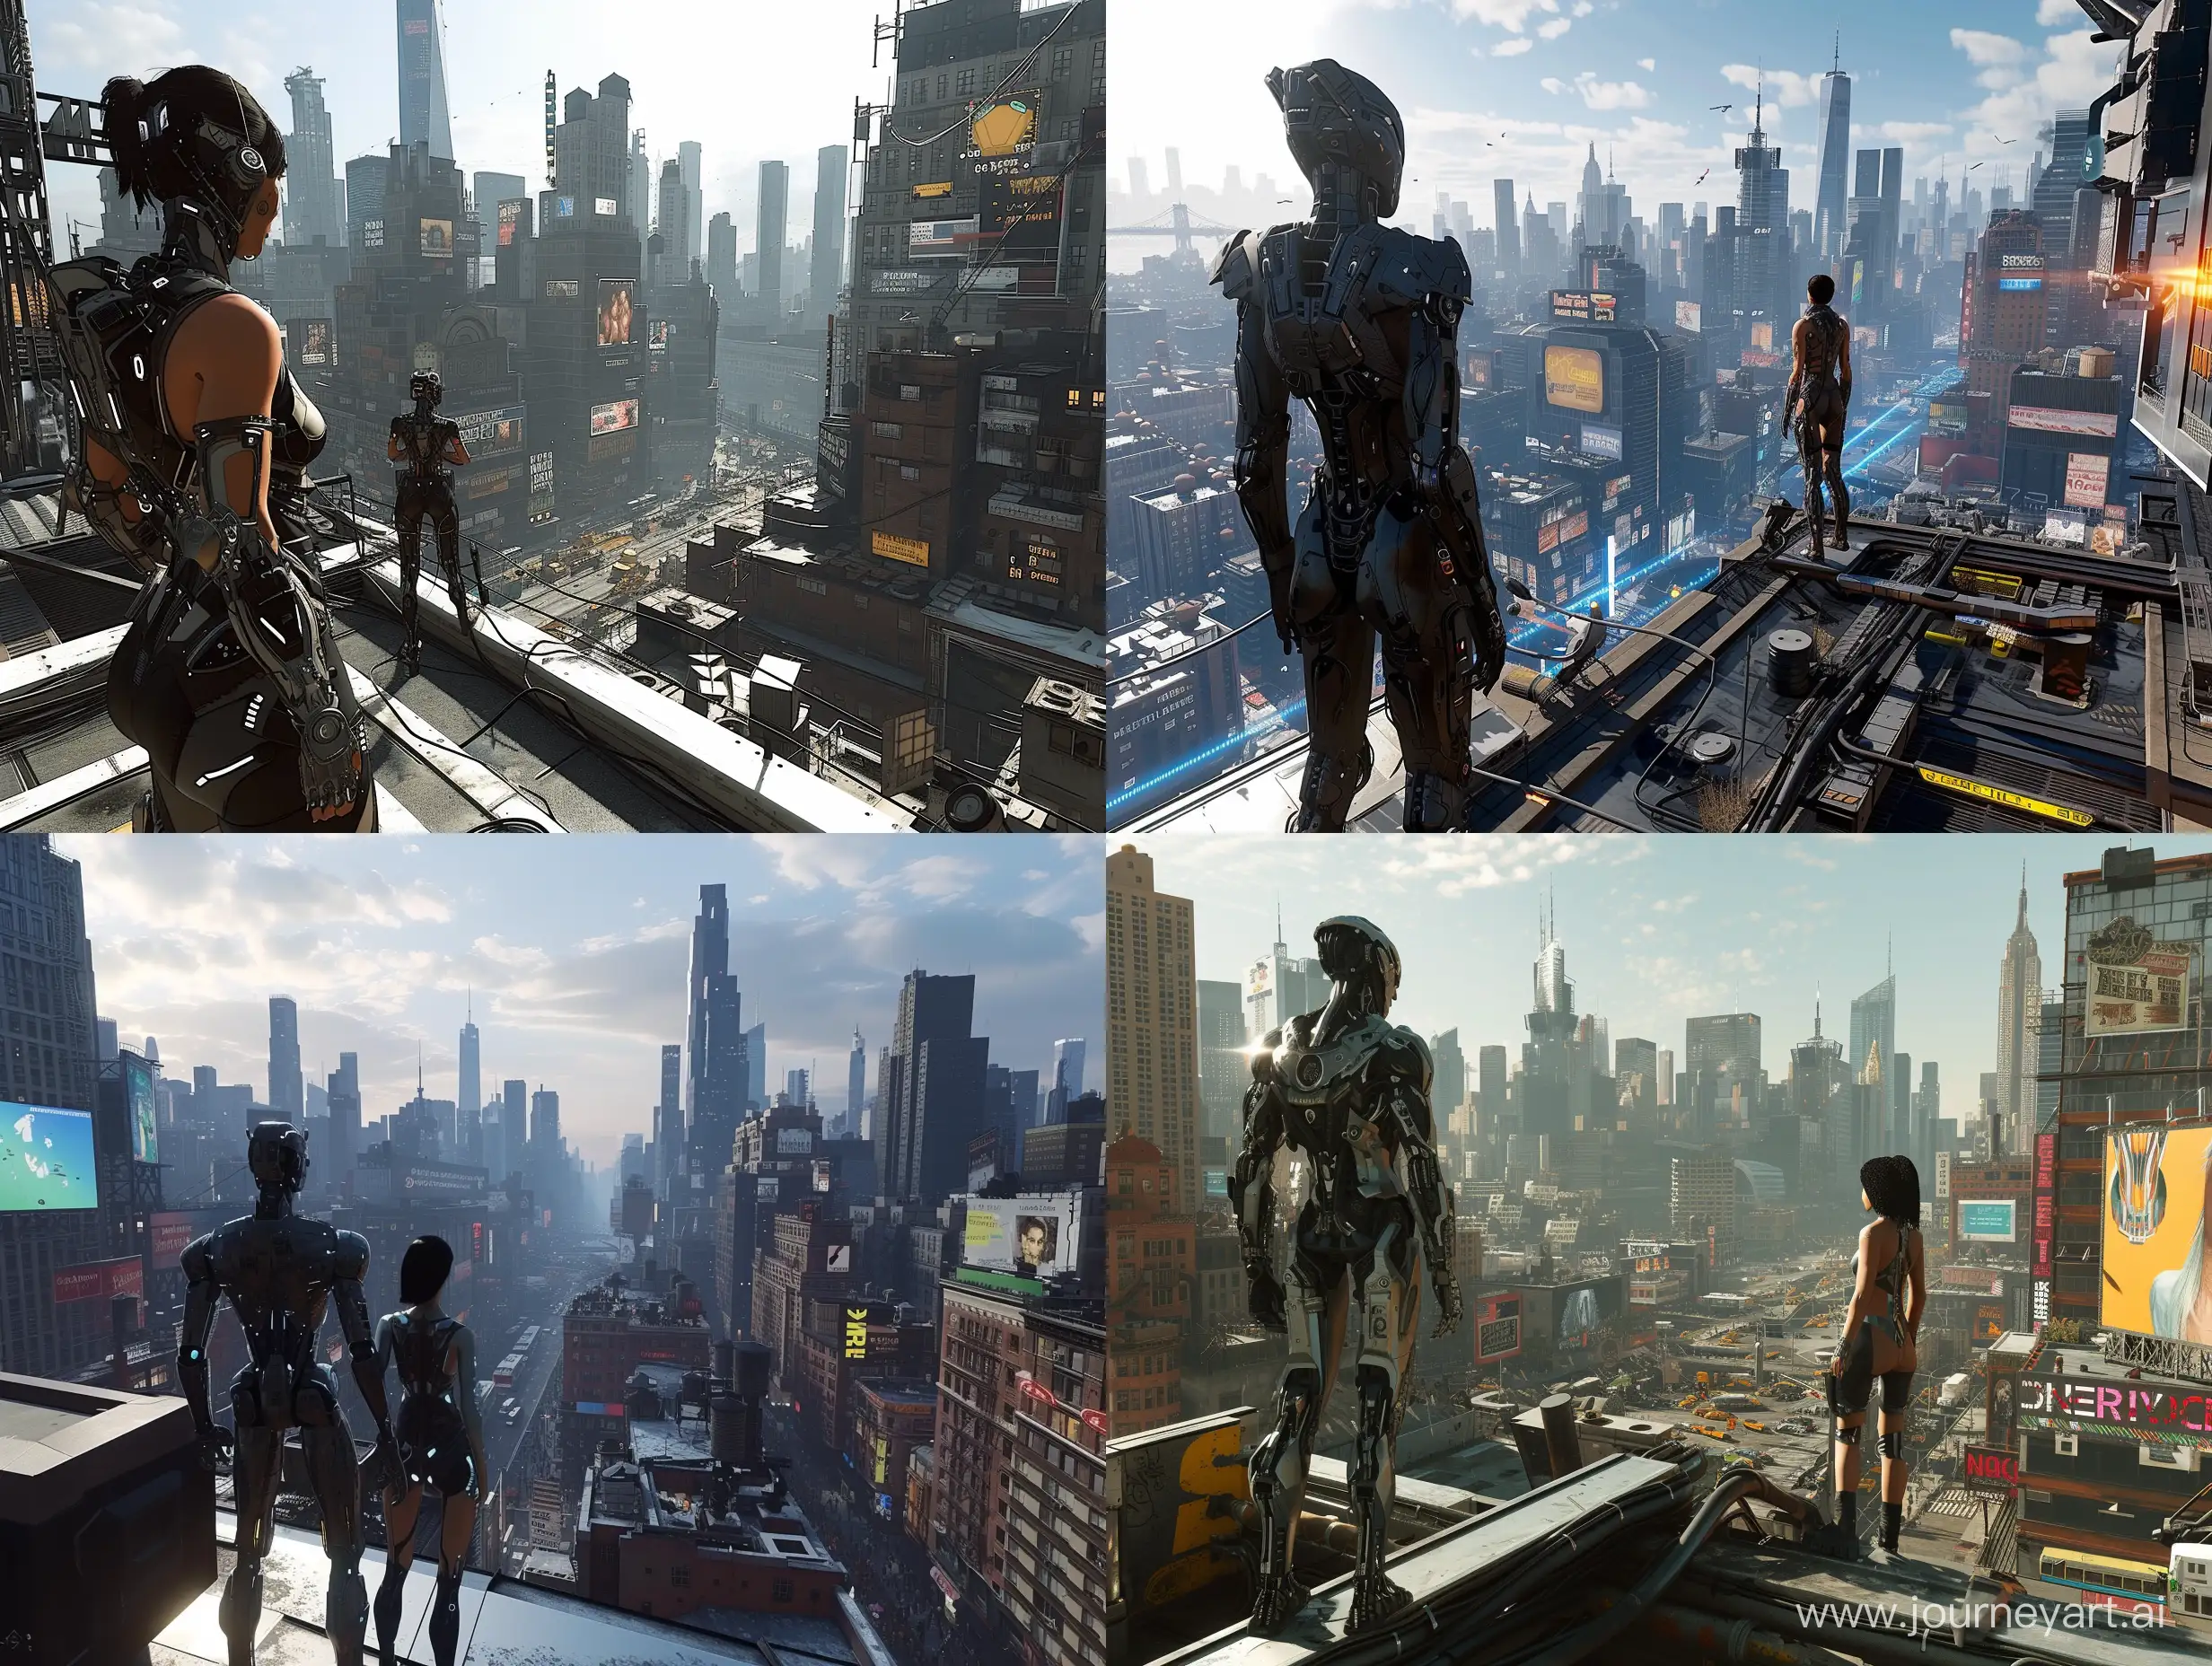 A screen capture shows a first-person view of a cybernetic man and woman standing on a rooftop with natural lighting. The bustling New York Manhattan skyline is visible, creating a science fiction world. The scene captures an open world area with transportation, skyscrapers, residences, commercials, and infrastructures. Visuals, 35mm.

